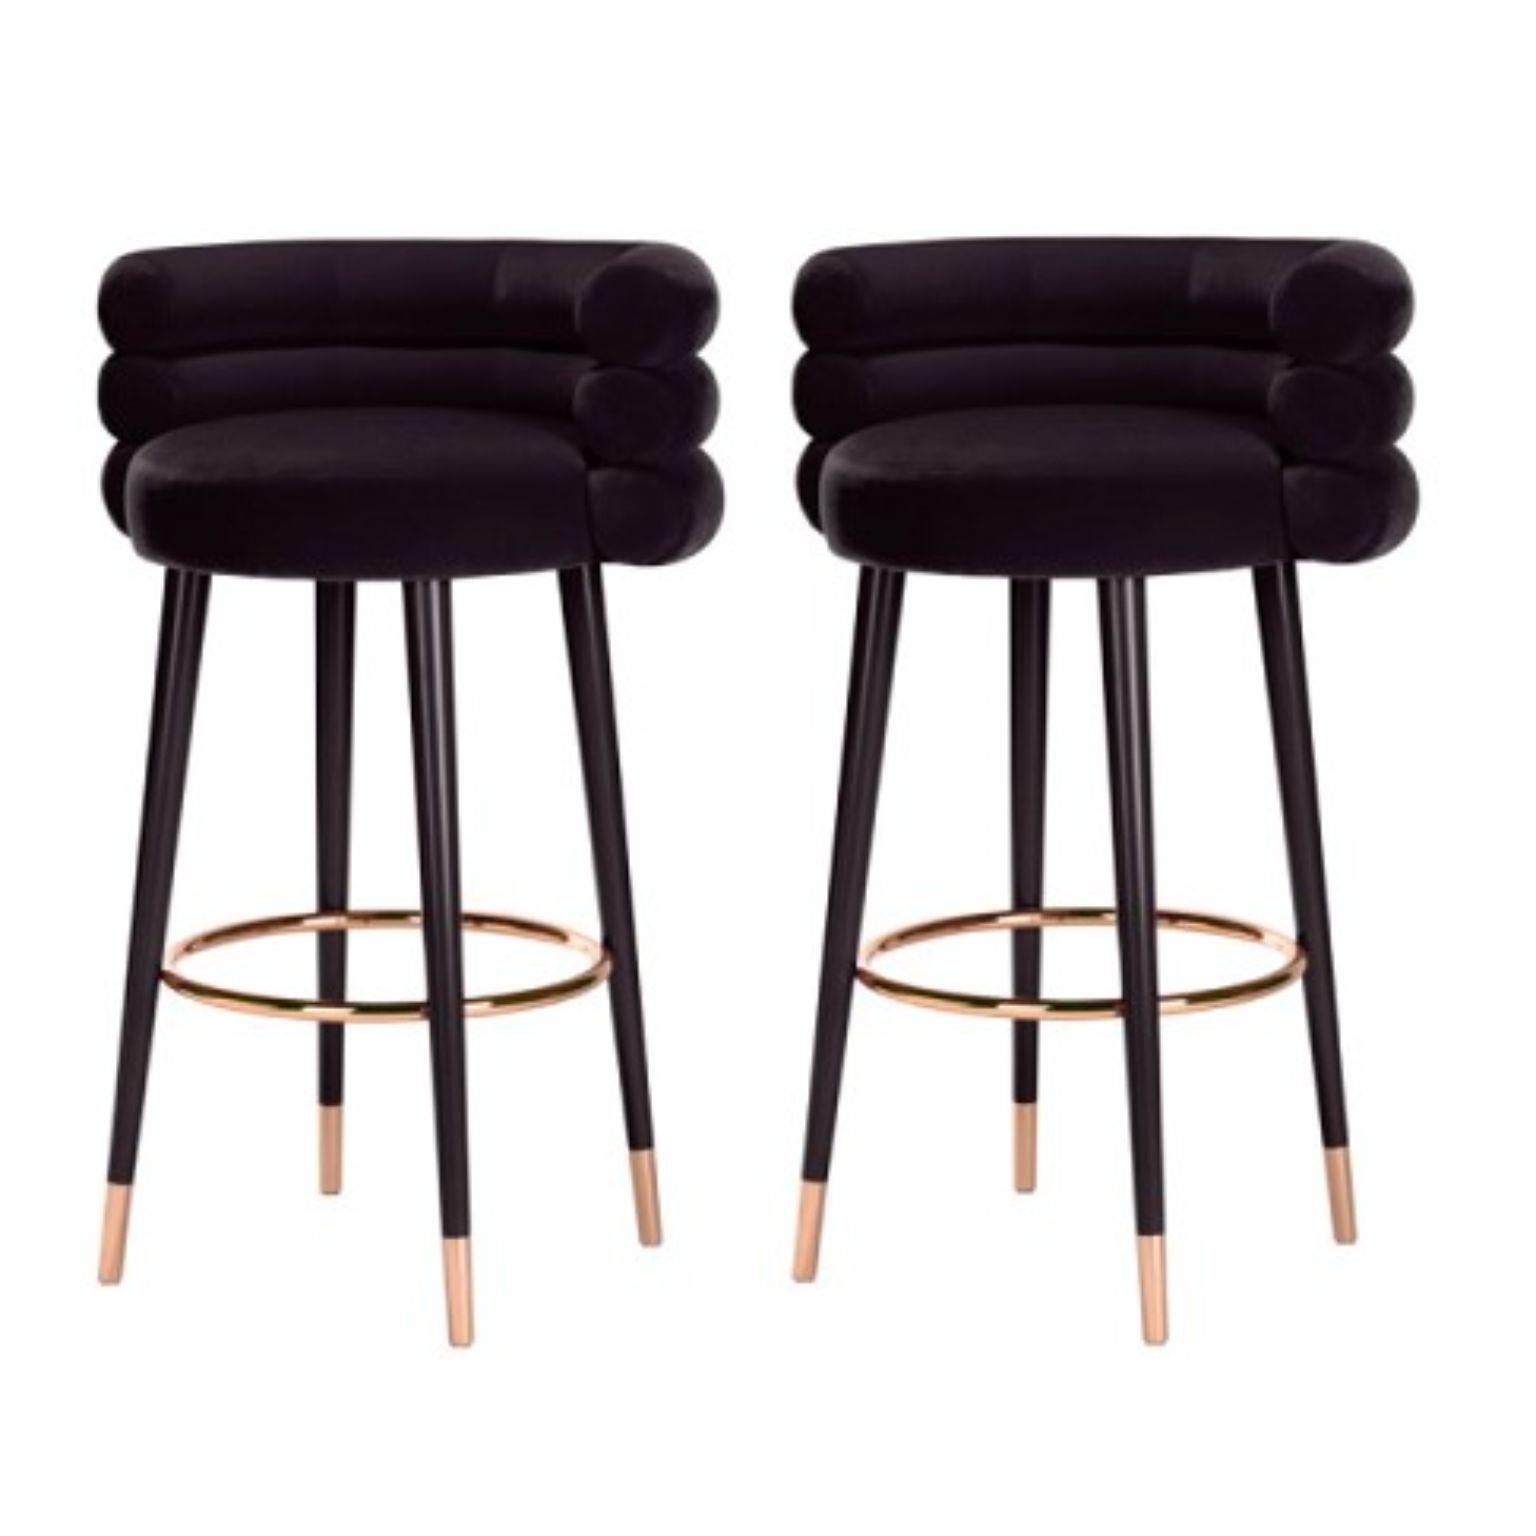 Set of 2 Marshmallow bar stools, Royal Stranger
Dimensions: 100 x 70 x 60 cm
Materials: Velvet upholstery, brass
Available in: Mint green, light pink, Royal green, Royal red

Royal stranger is an exclusive furniture brand determined to bring